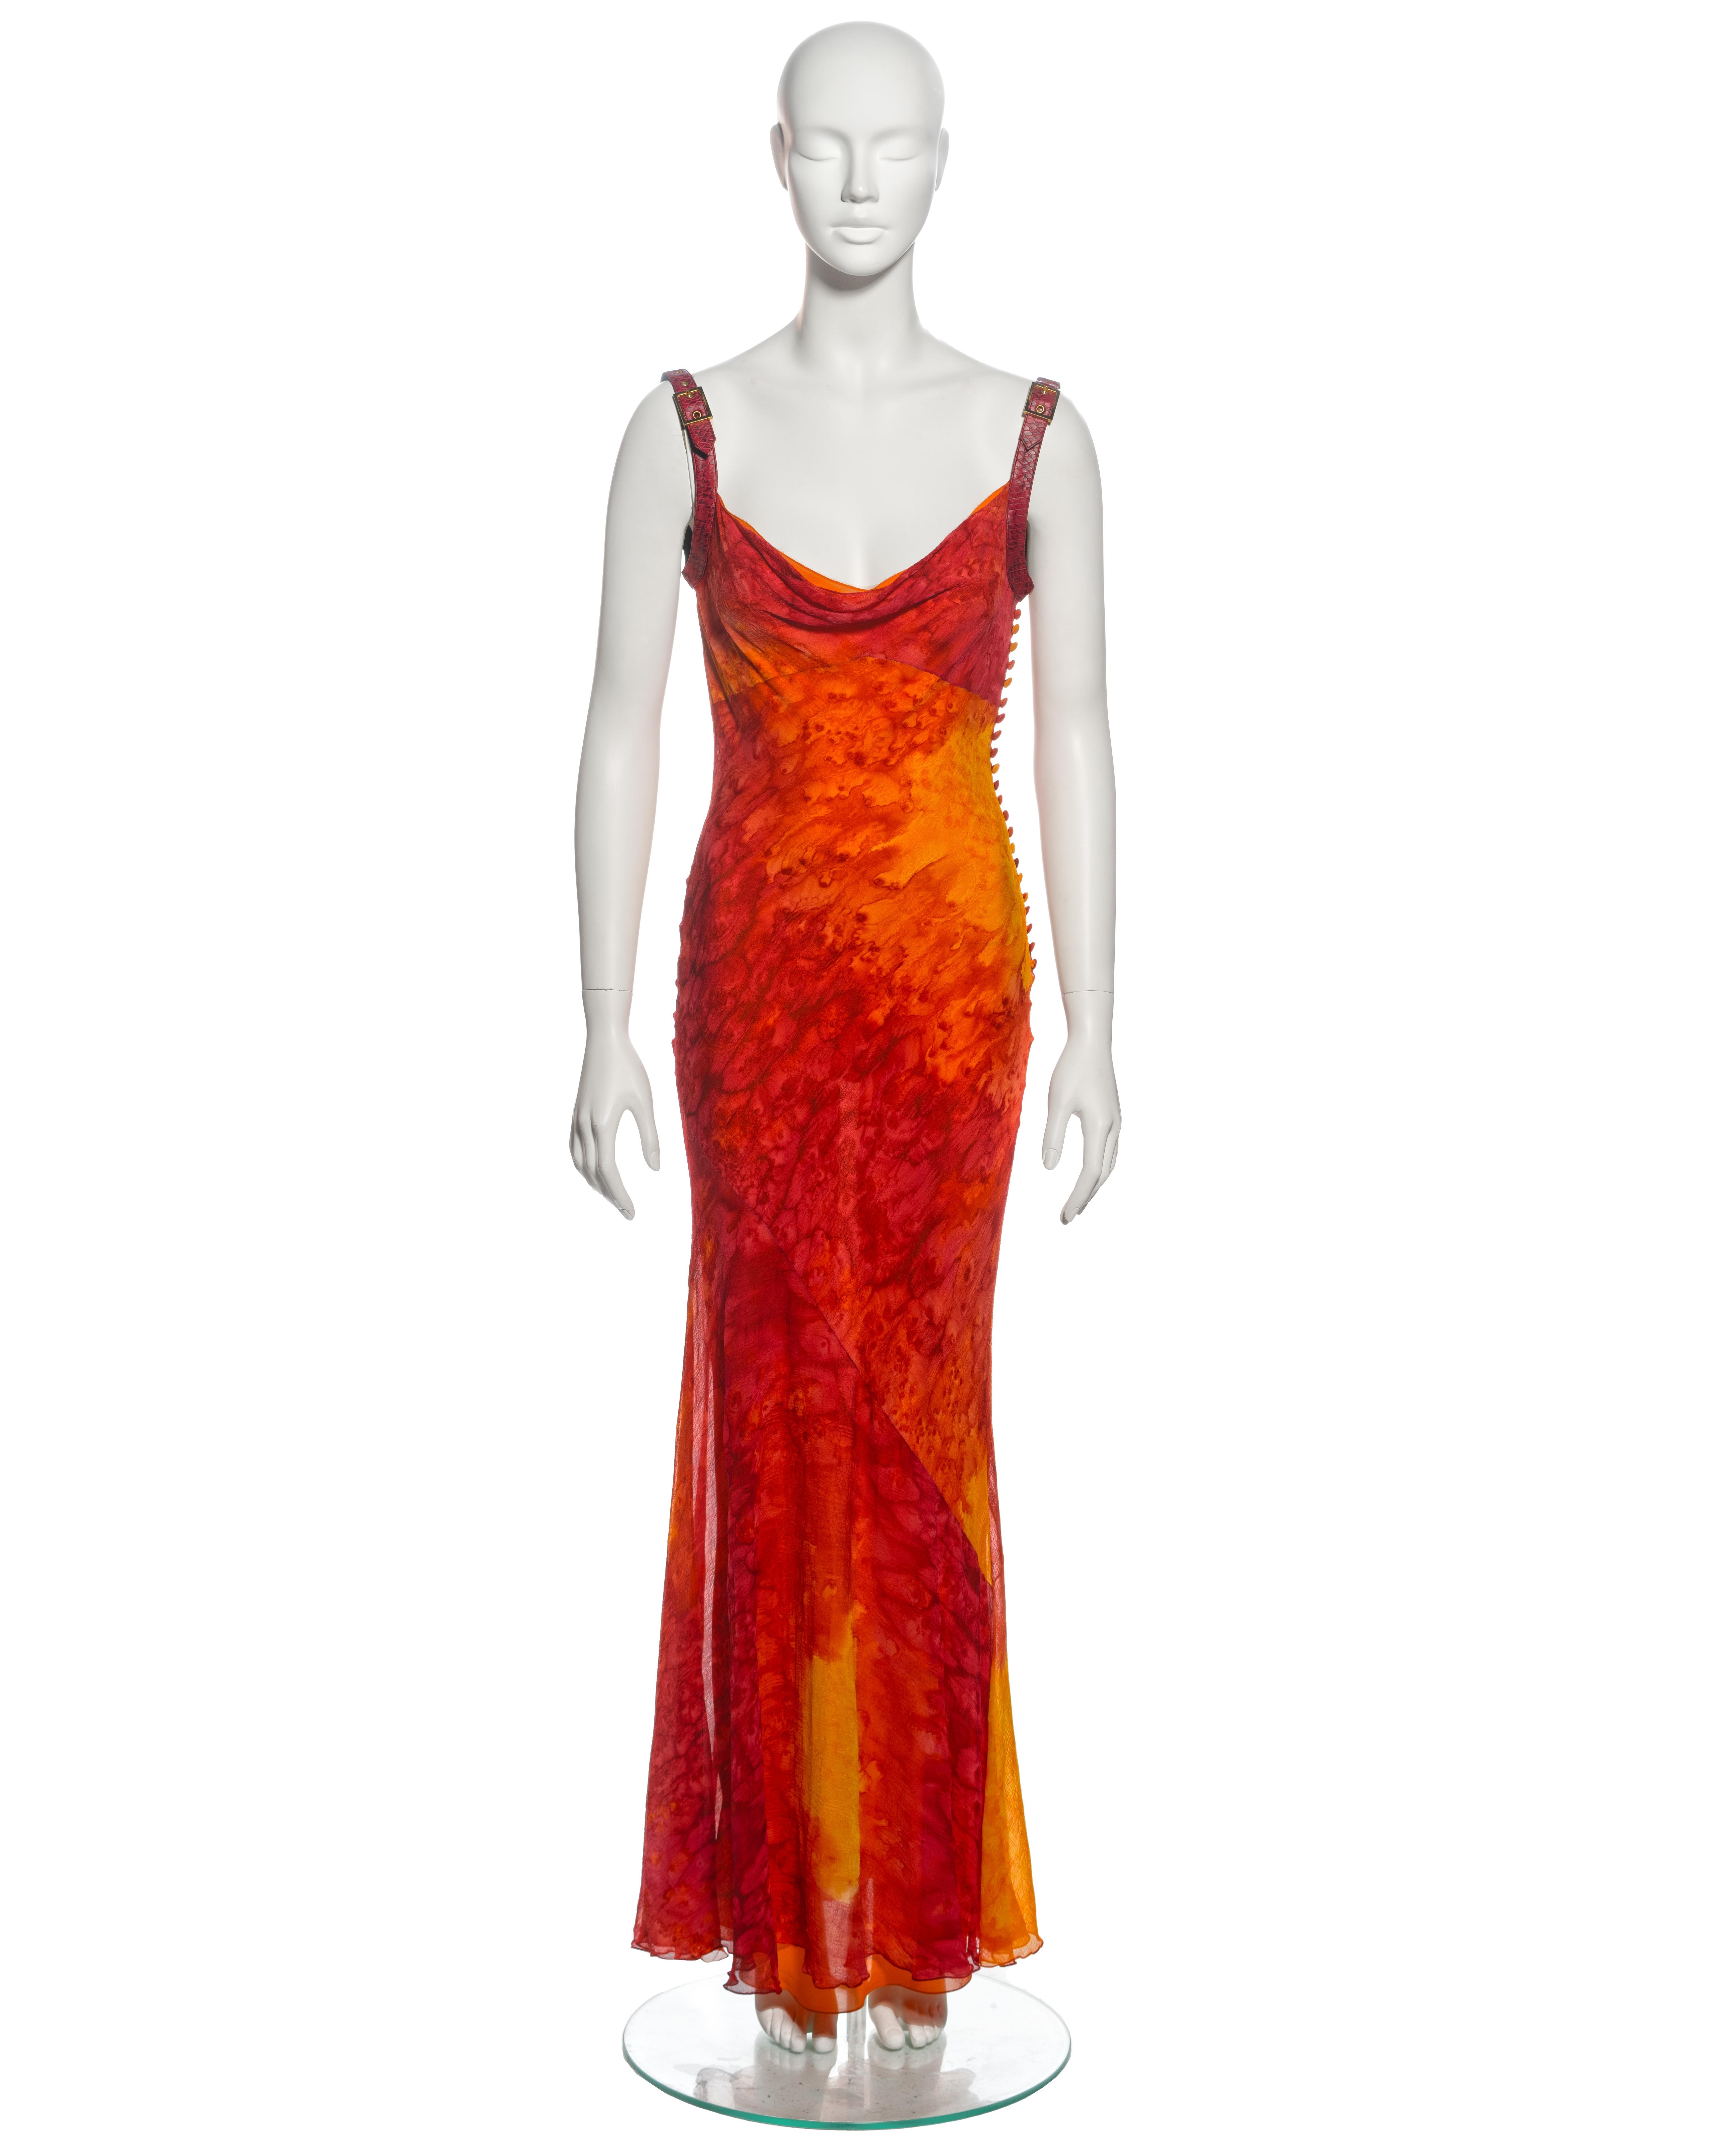 ▪ Archival Christian Dior Evening Dress
▪ Creative Director: John Galliano
▪ Spring-Summer 2001
▪ Sold by One of a Kind Archive
▪ Crafted from luxurious bias-cut silk chiffon, embellished with a captivating tie-dye print in vibrant saffron, orange,